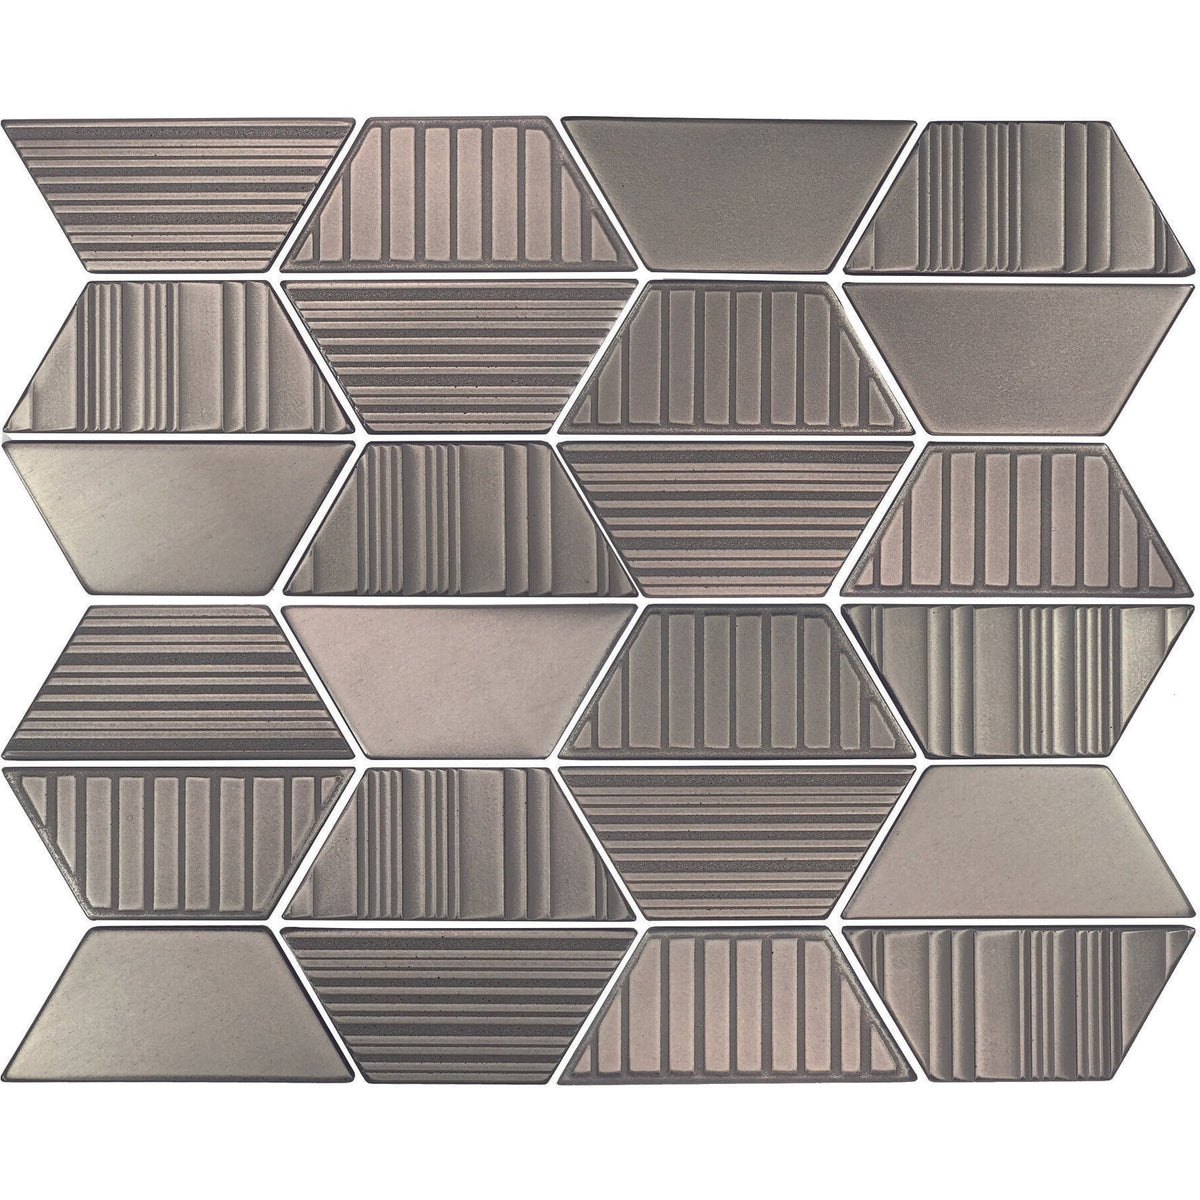 Daltile - Industrial Metals 10 in. x 13 in. - Trapezoid Mosaic - Stainless